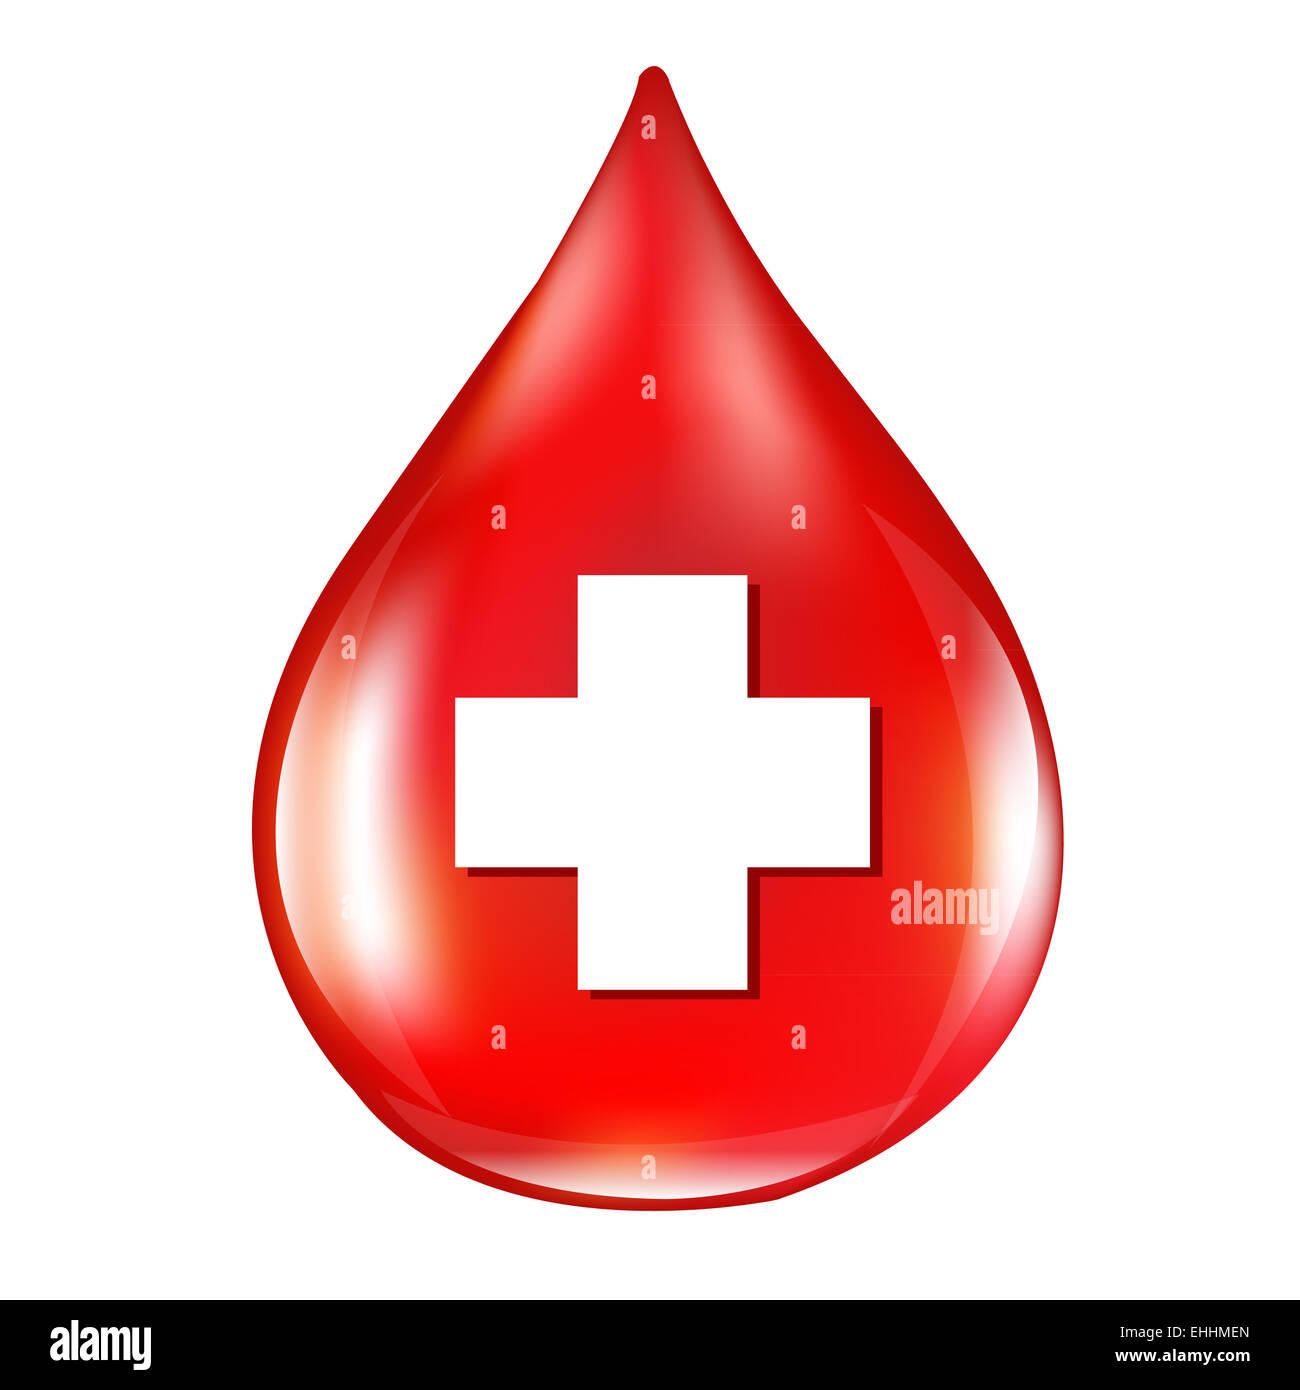 Red Blood Drop Stock Photo